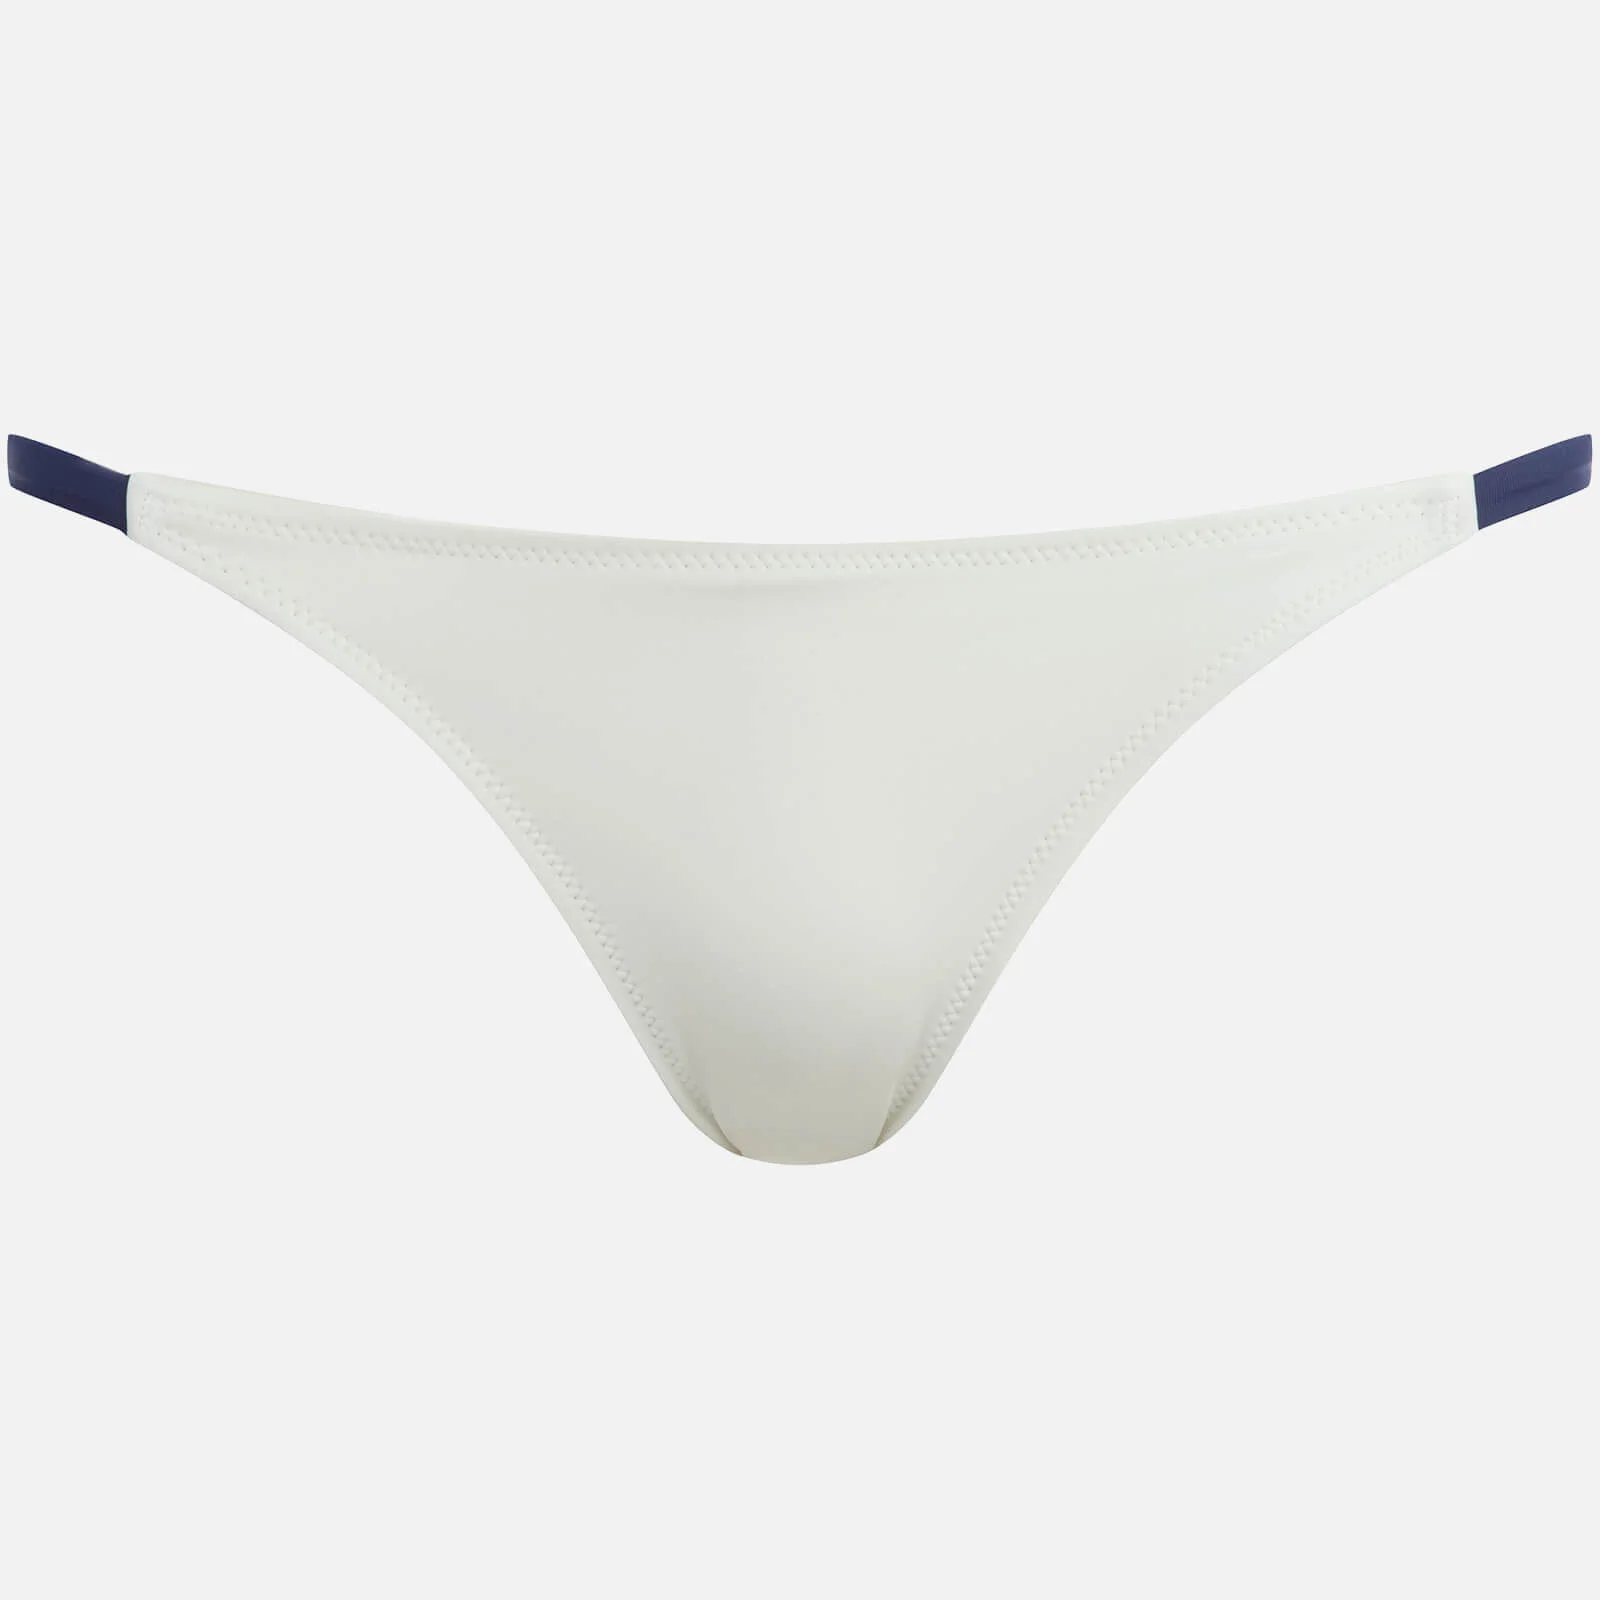 Solid & Striped Women's The Morgan Bottoms - Cream/Navy Image 1